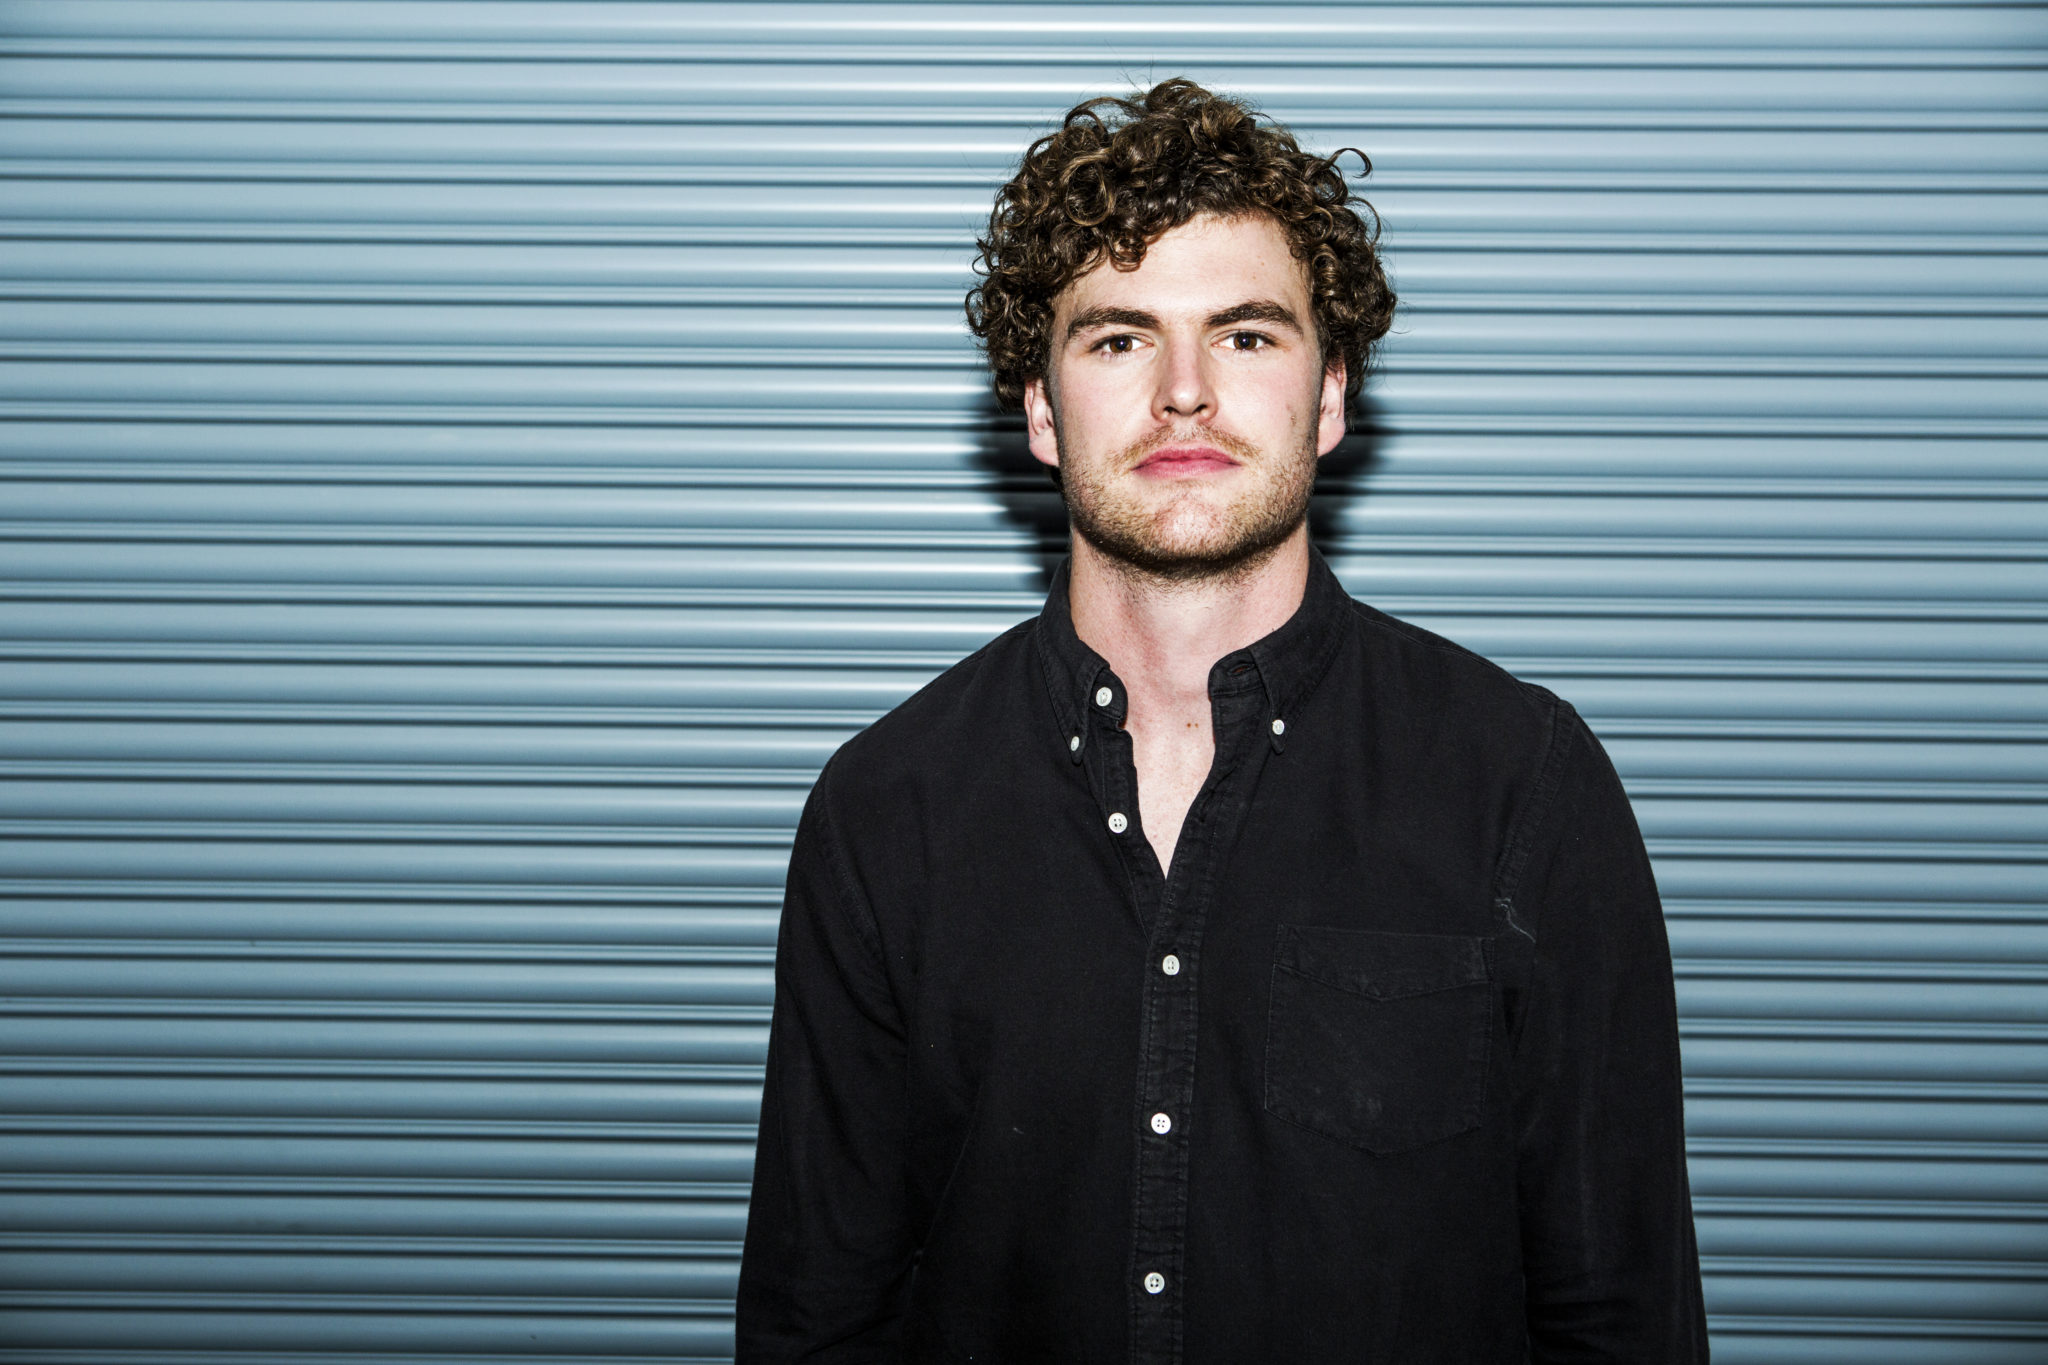 Most Added: Vance Joy picks up another win at radio